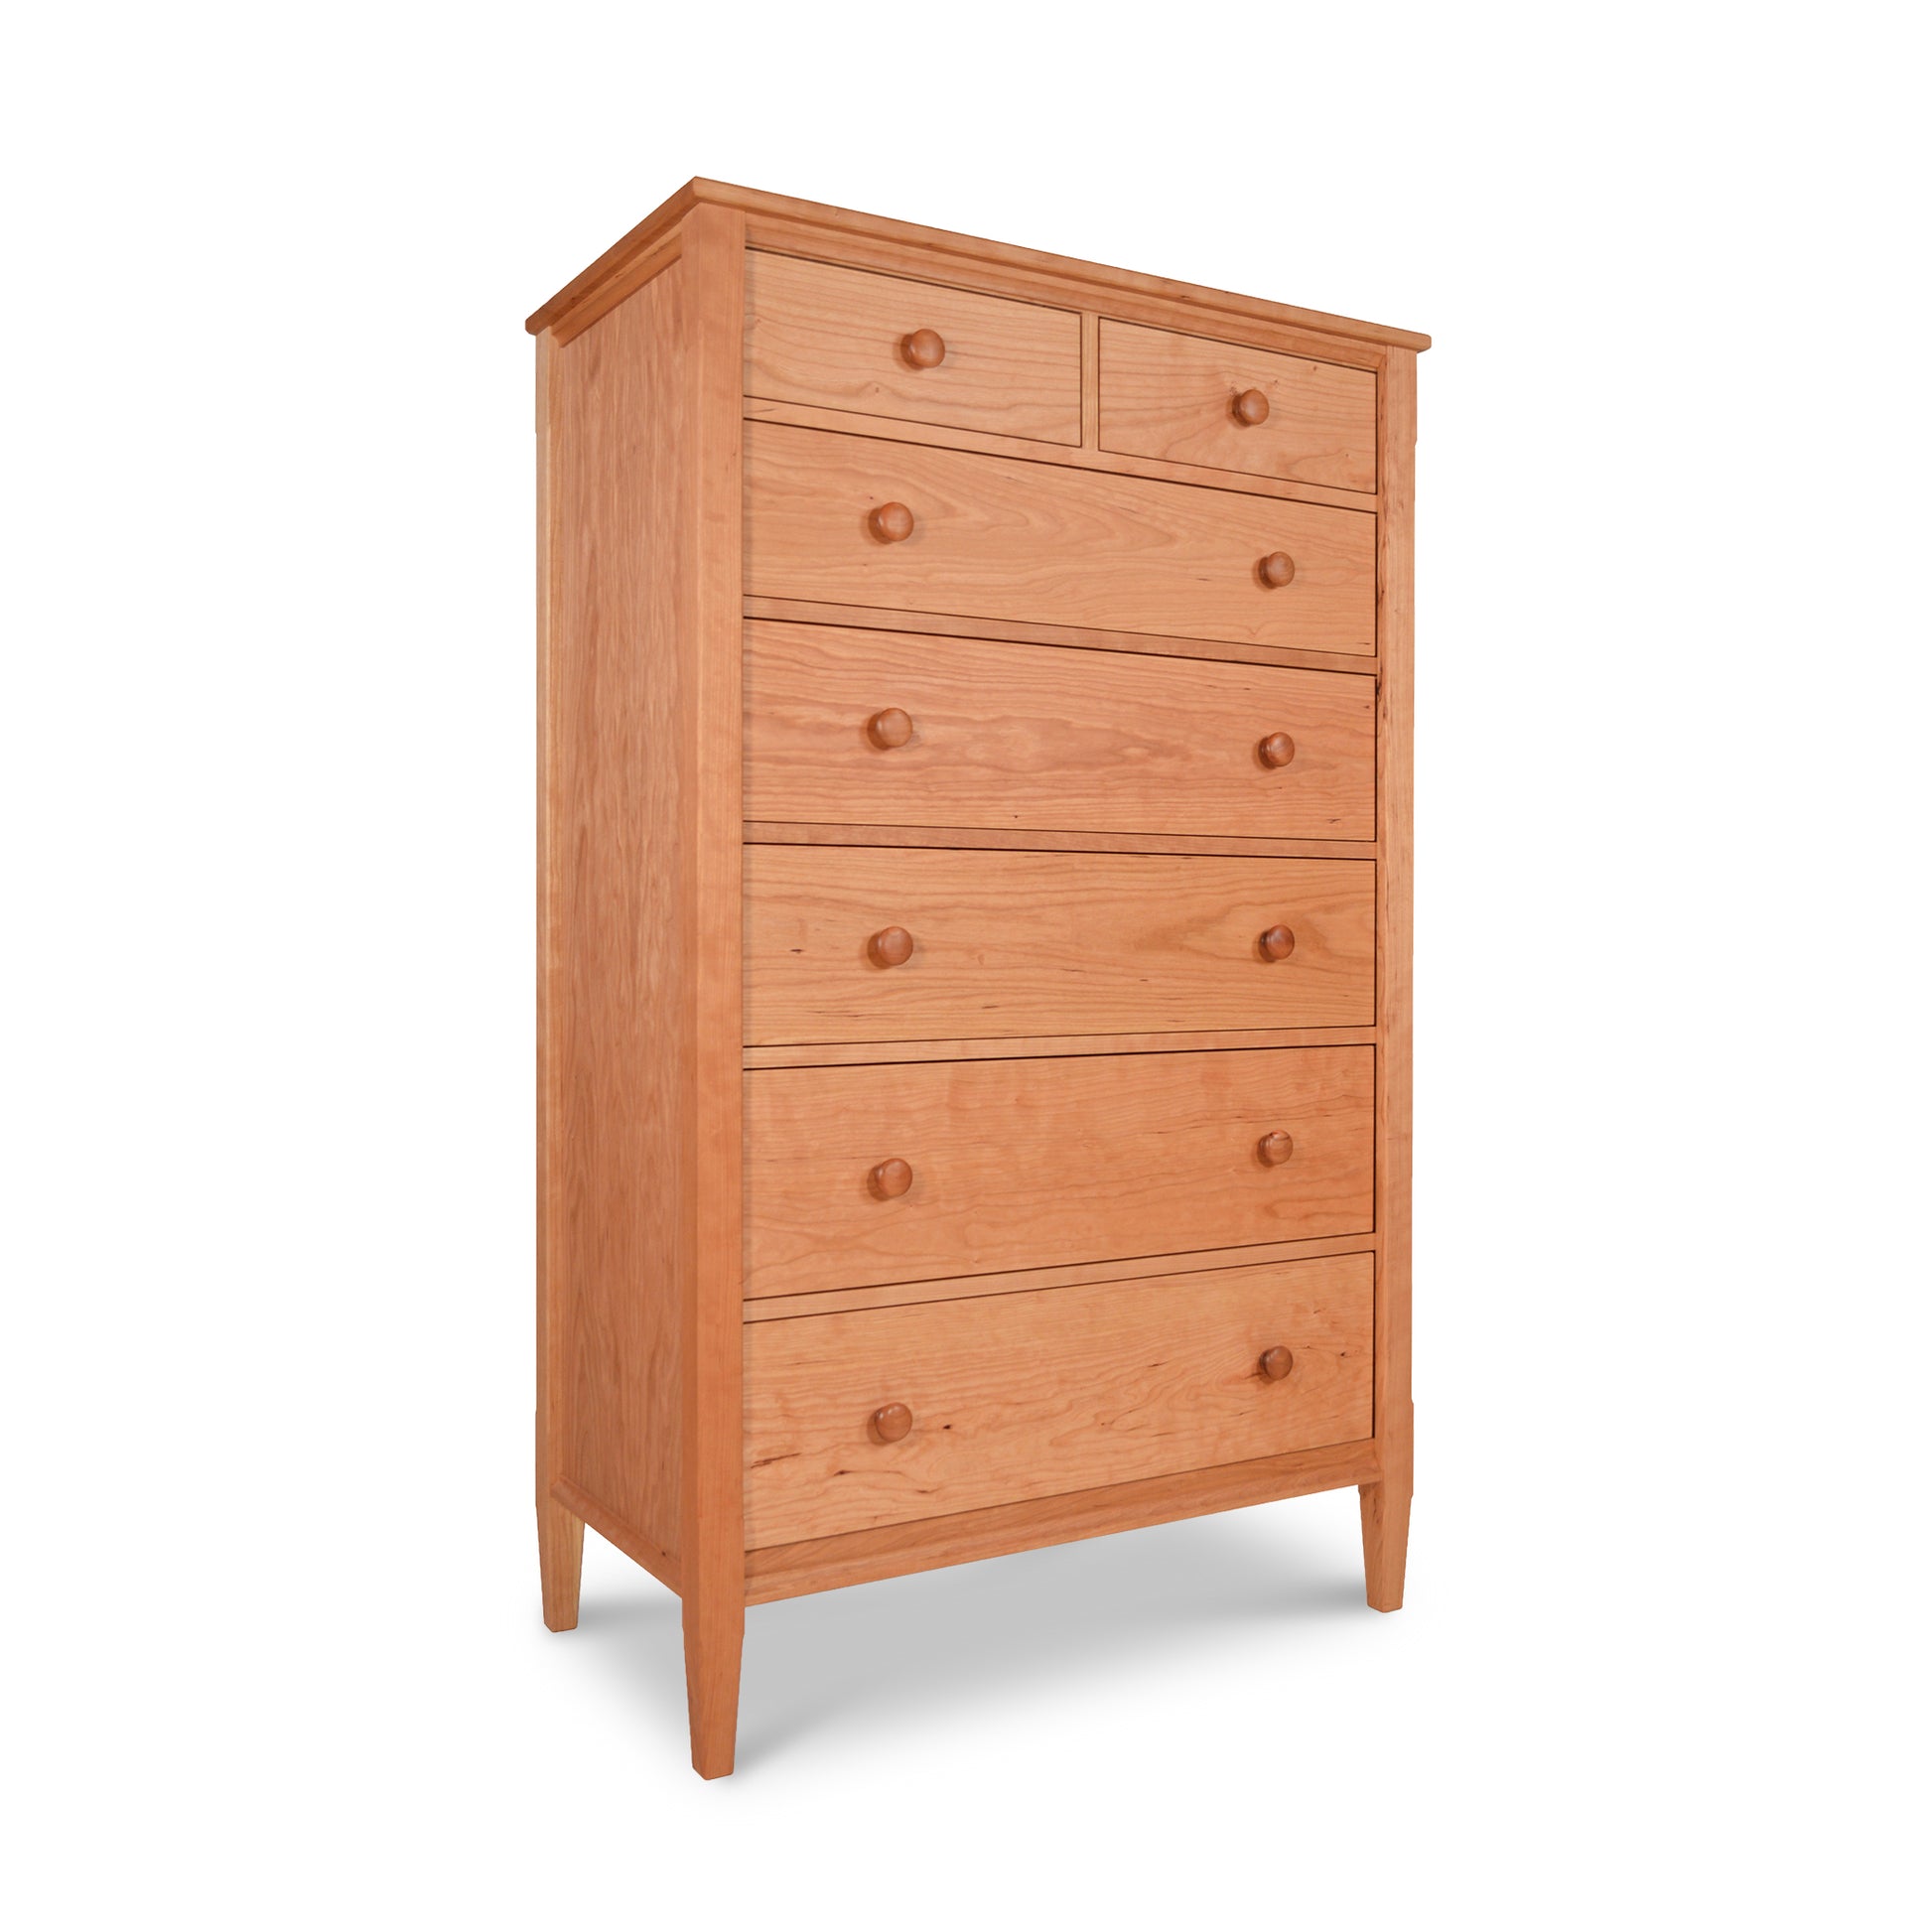 A natural cherry Maple Corner Woodworks Vermont Shaker 7 Drawer Chest on a white background.